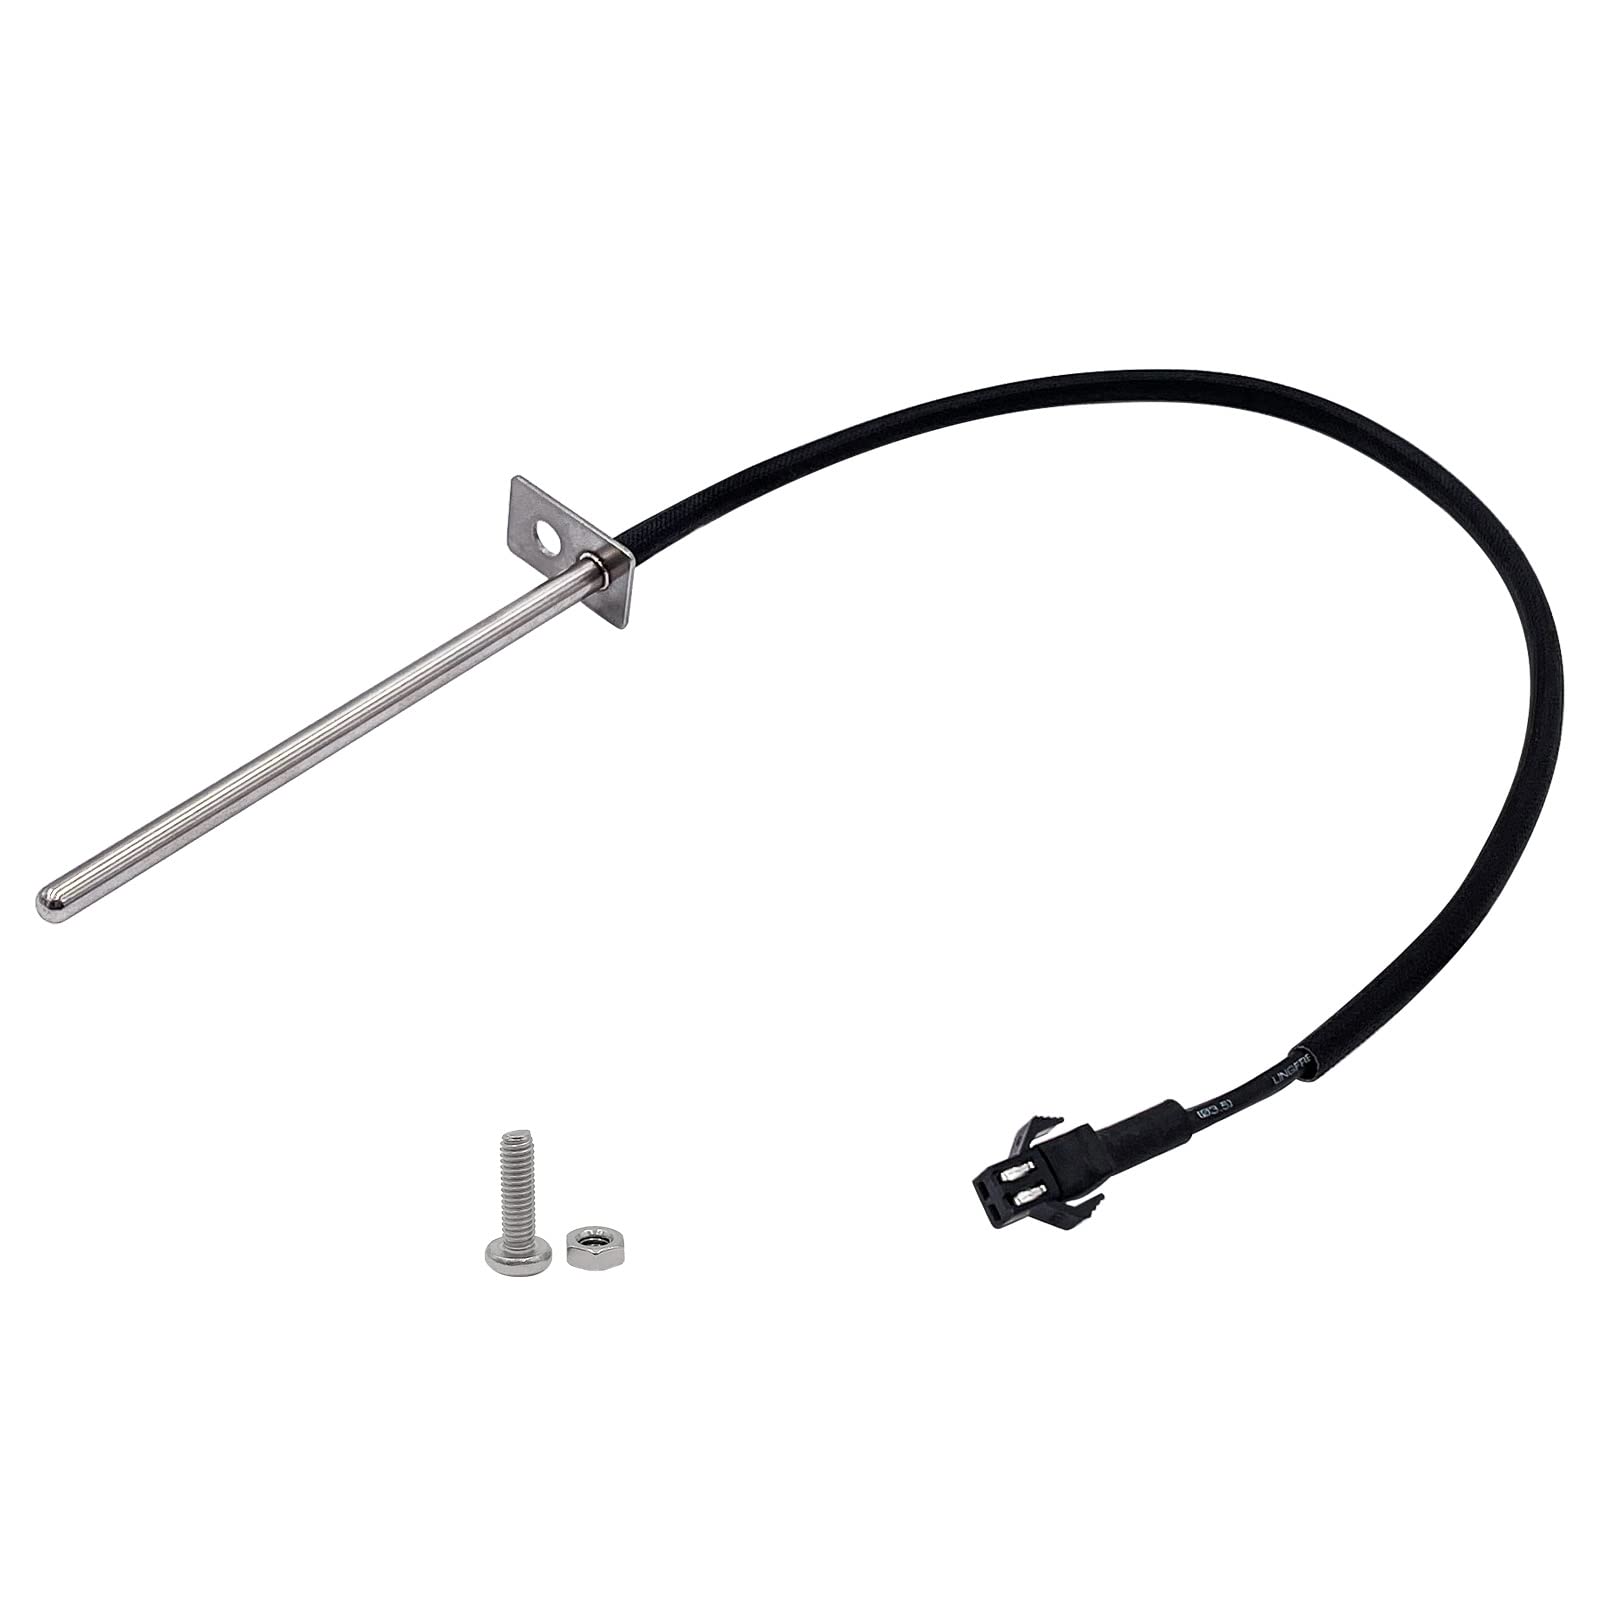 Heat Sensor for Char-Griller Gravity Fed 980 Charcoal Grill-YAOAWE